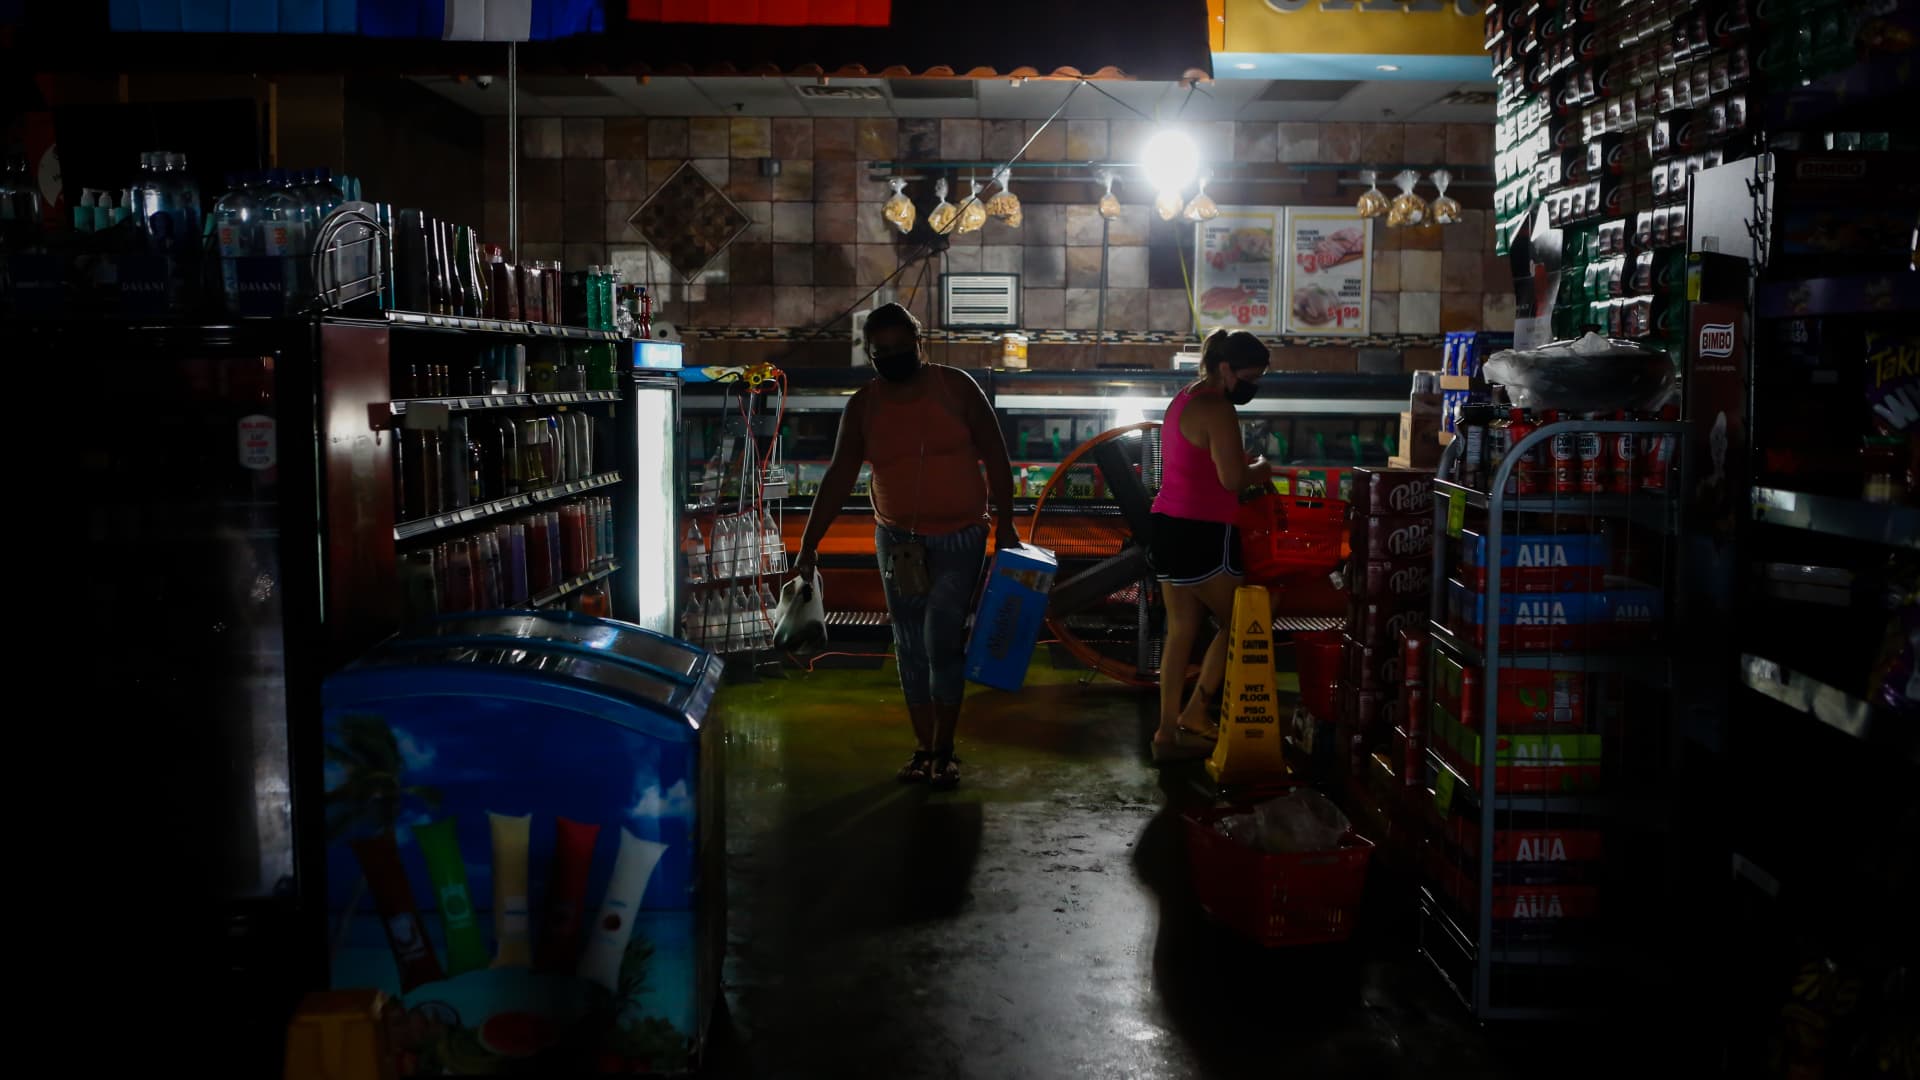 Shoppers buy supplies at a grocery store during the blackout after Hurricane Ida in New Orleans, Louisiana, U.S., on Thursday, Sept. 2, 2021.